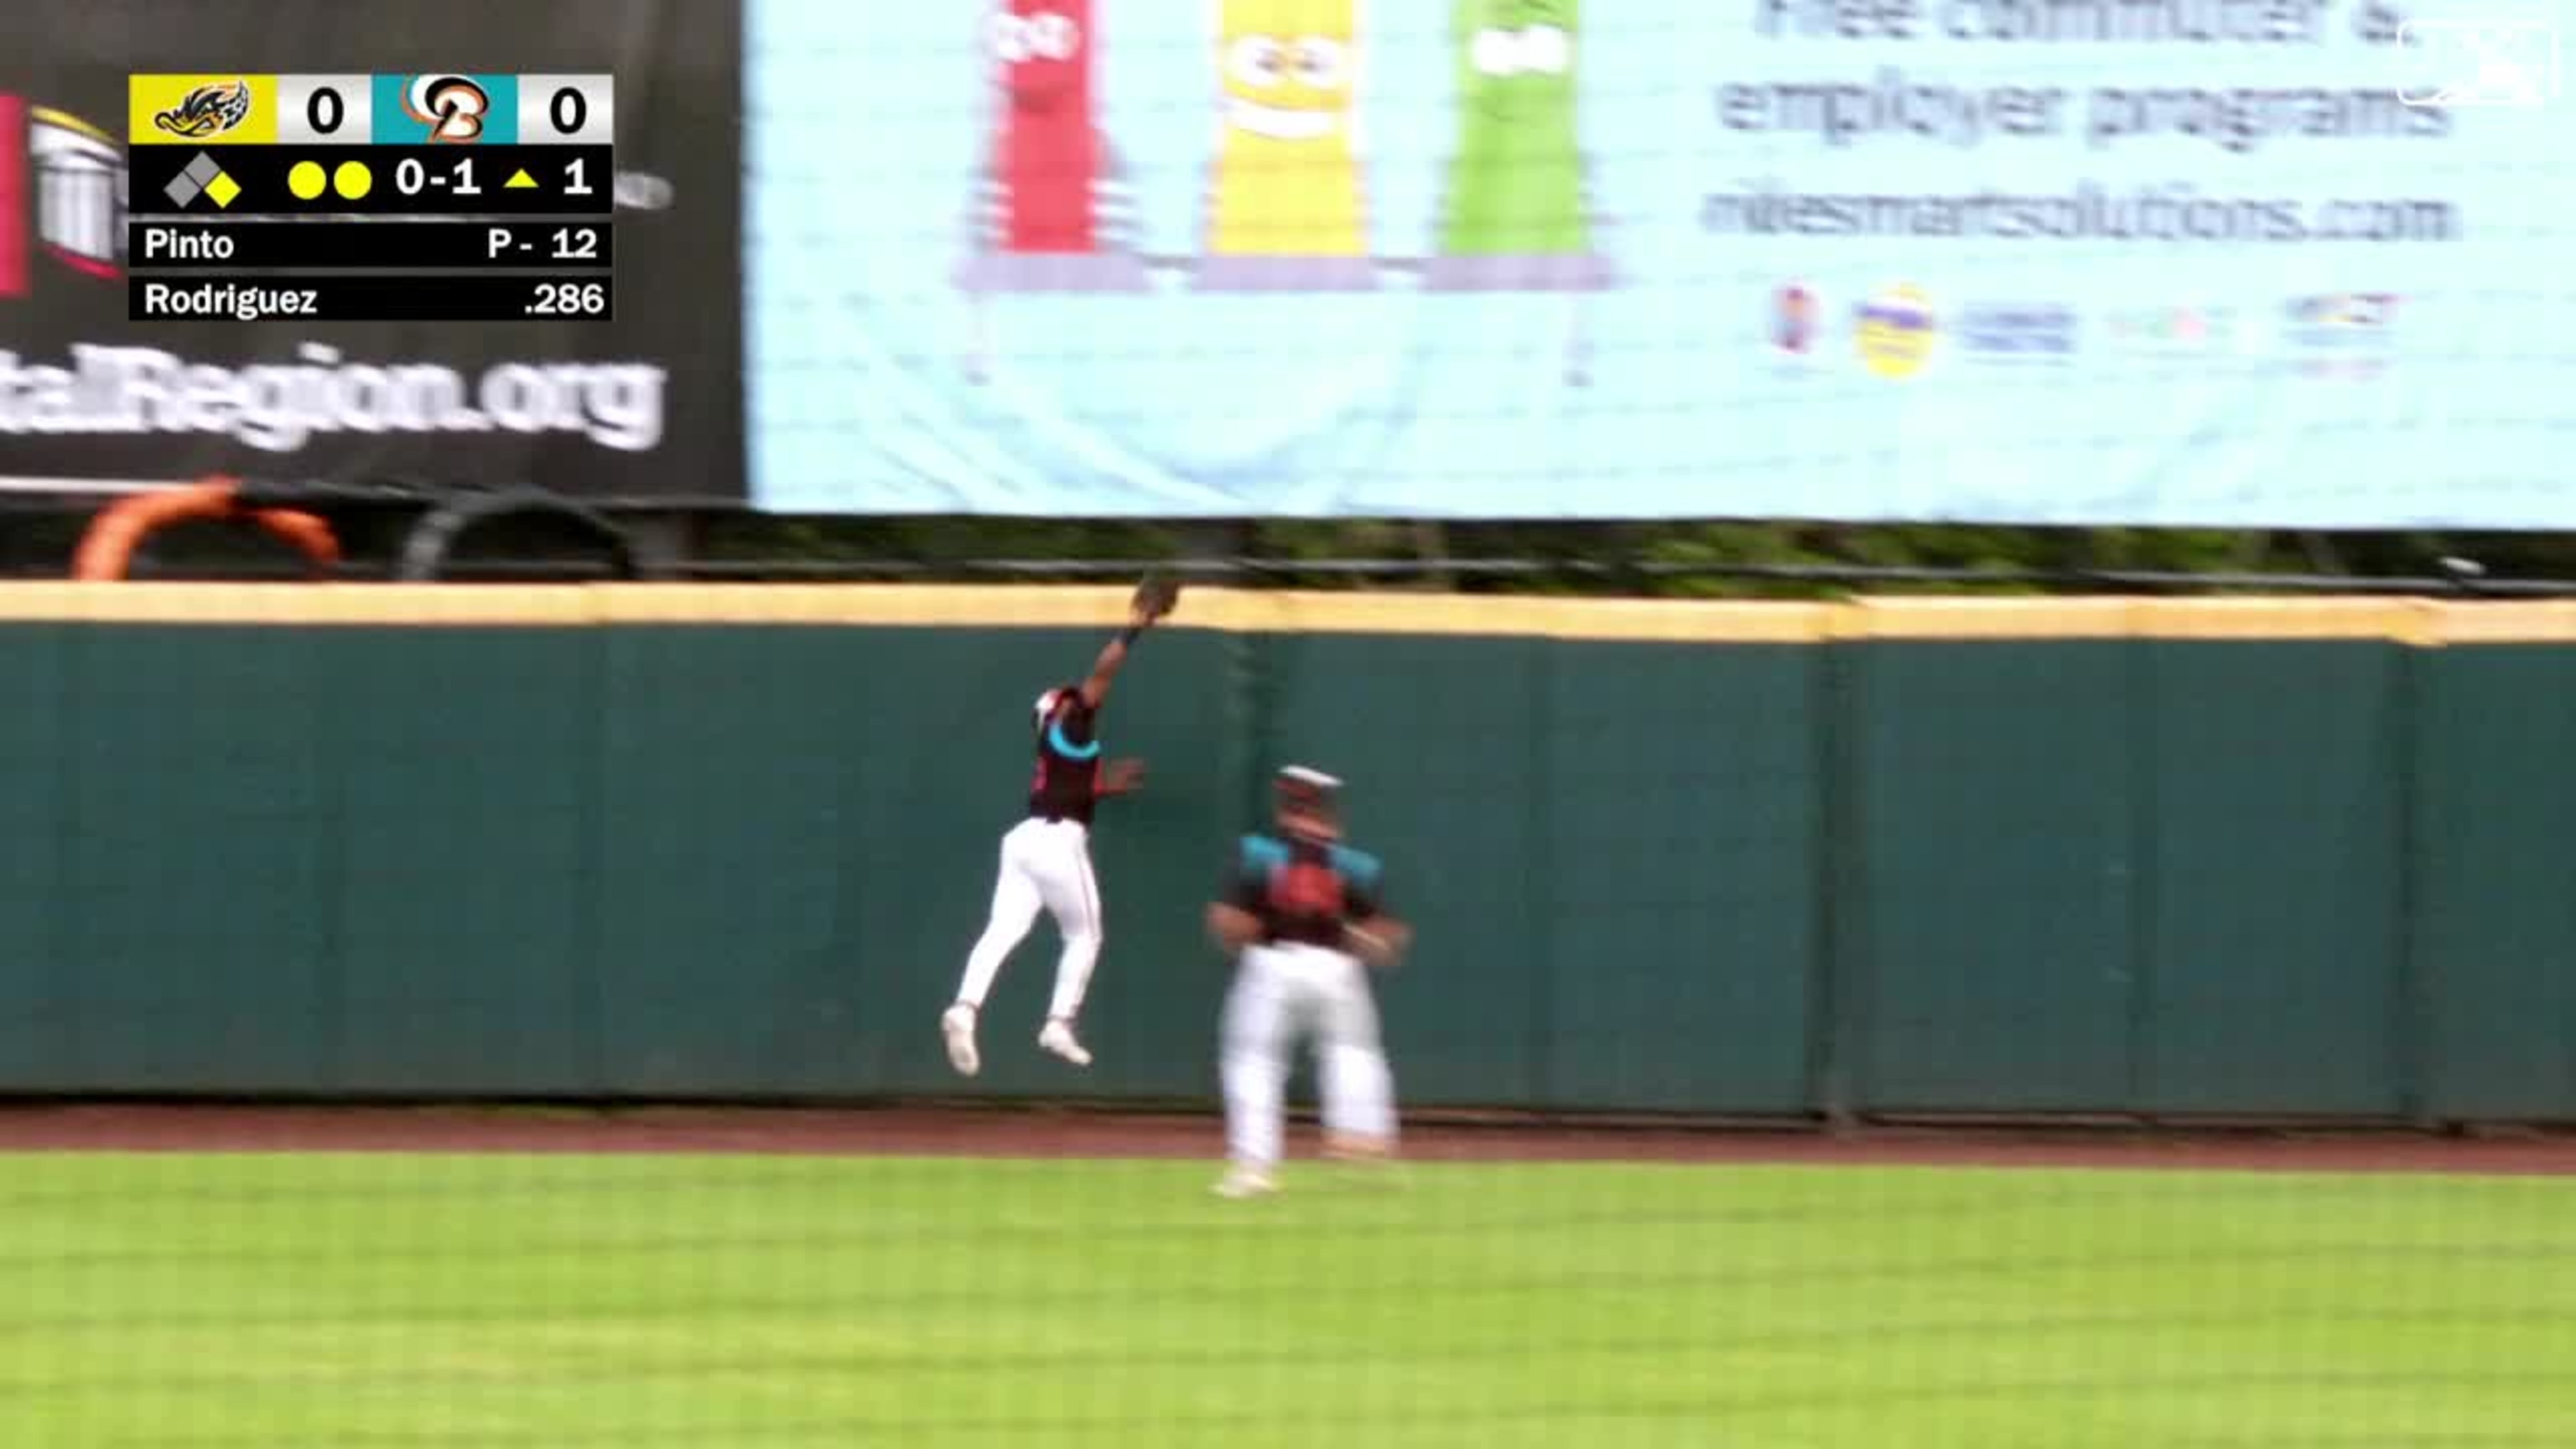 Donta' Williams makes an incredible diving catch for the Double-A